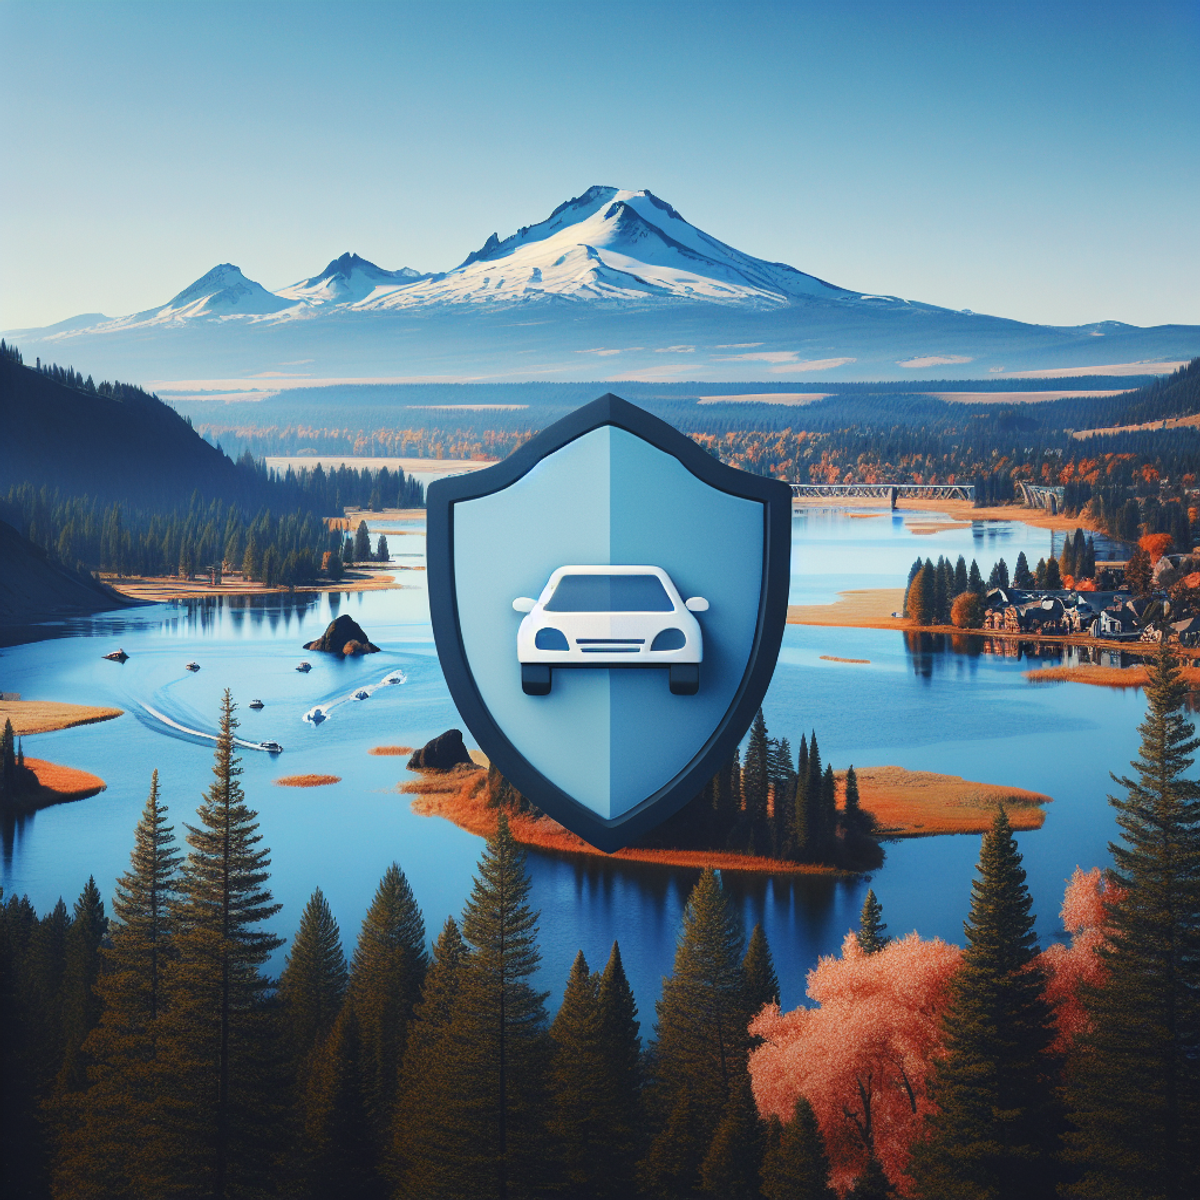 A scenic landscape of Bend, Oregon with the Deschutes River flowing through, snow-capped Cascade Mountains in the background, and a car and a shield symbolizing protection subtly placed in the foreground.